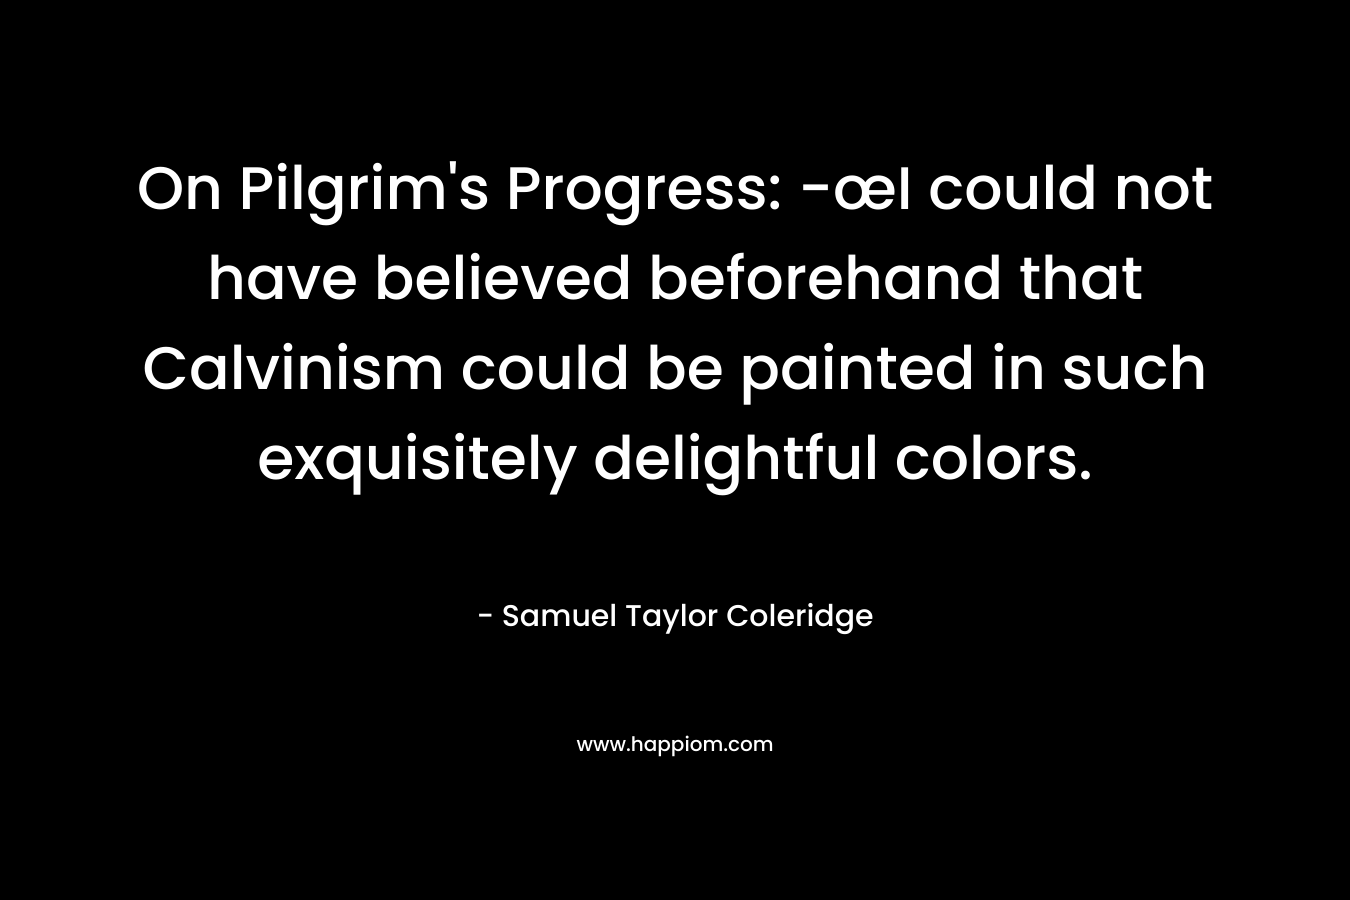 On Pilgrim’s Progress: -œI could not have believed beforehand that Calvinism could be painted in such exquisitely delightful colors. – Samuel Taylor Coleridge